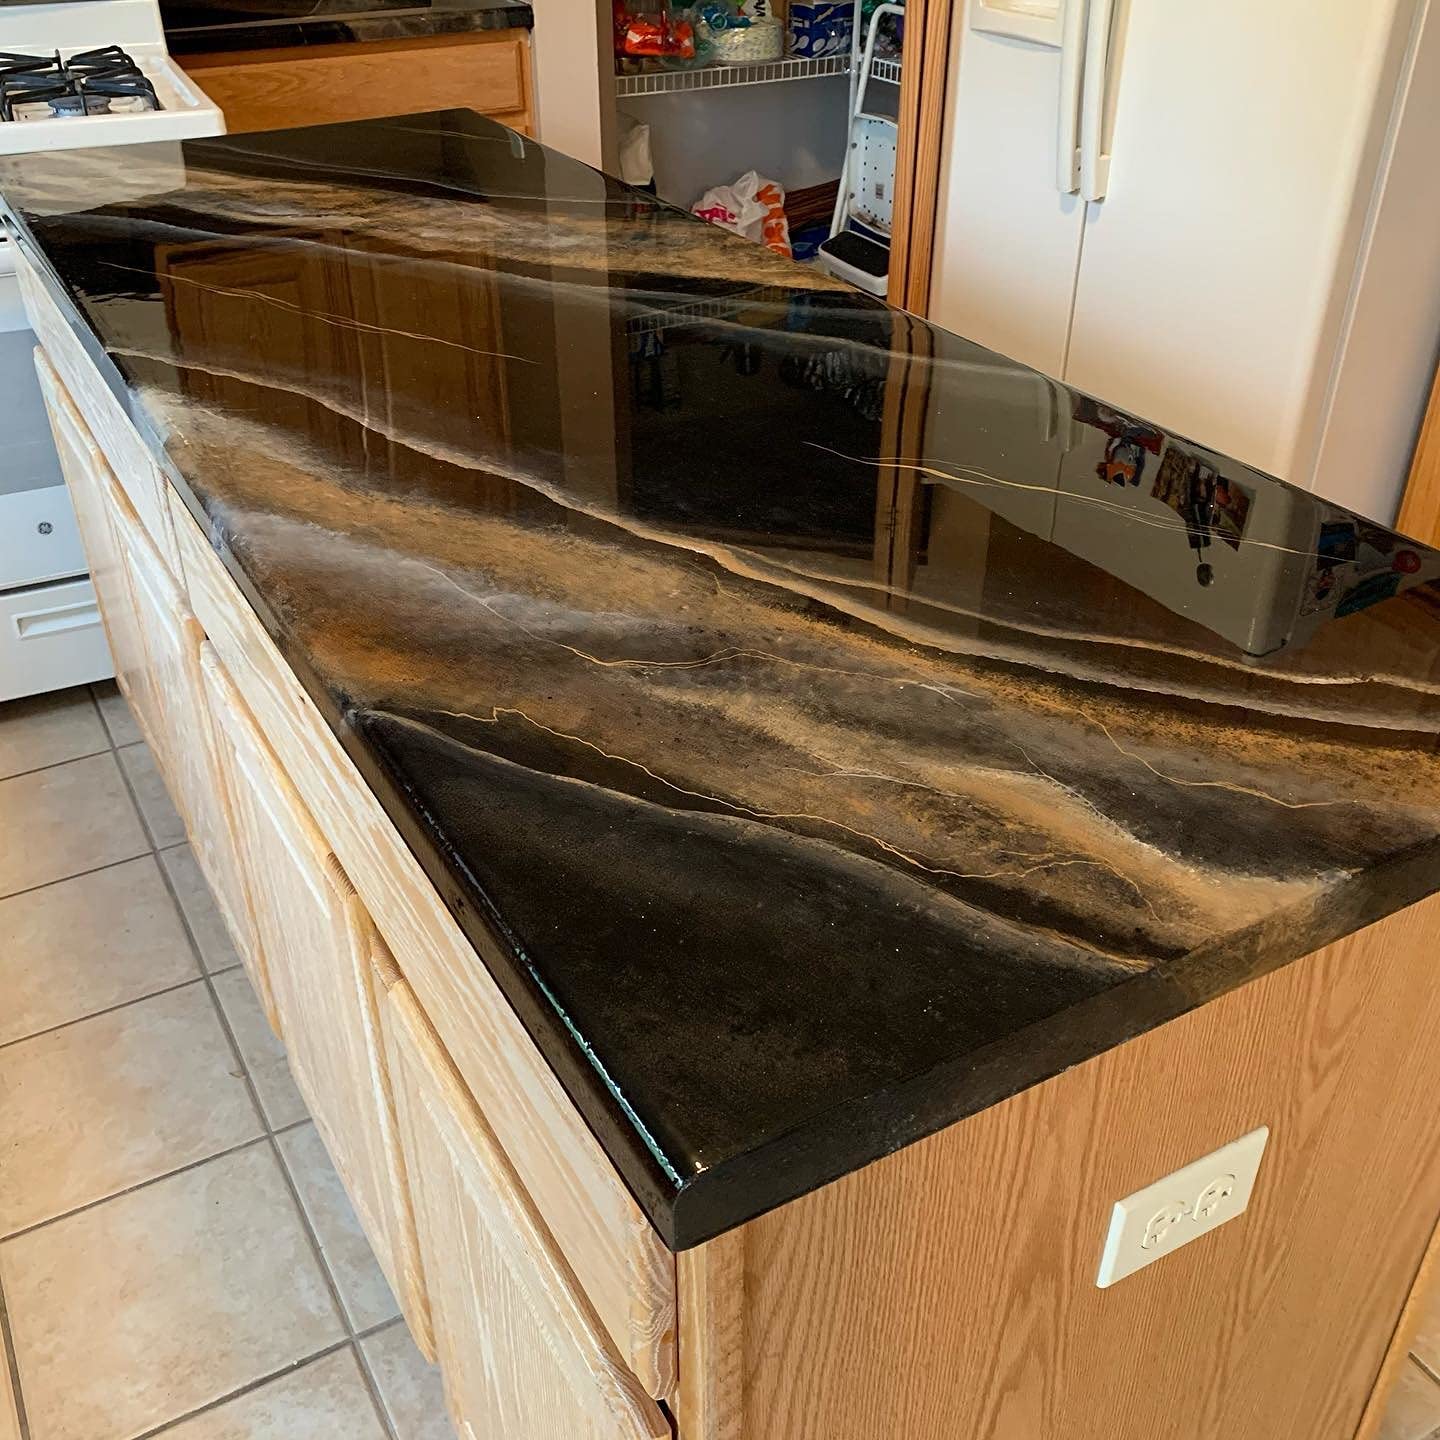 How Much Do Epoxy Countertops Cost? - The Dedicated House